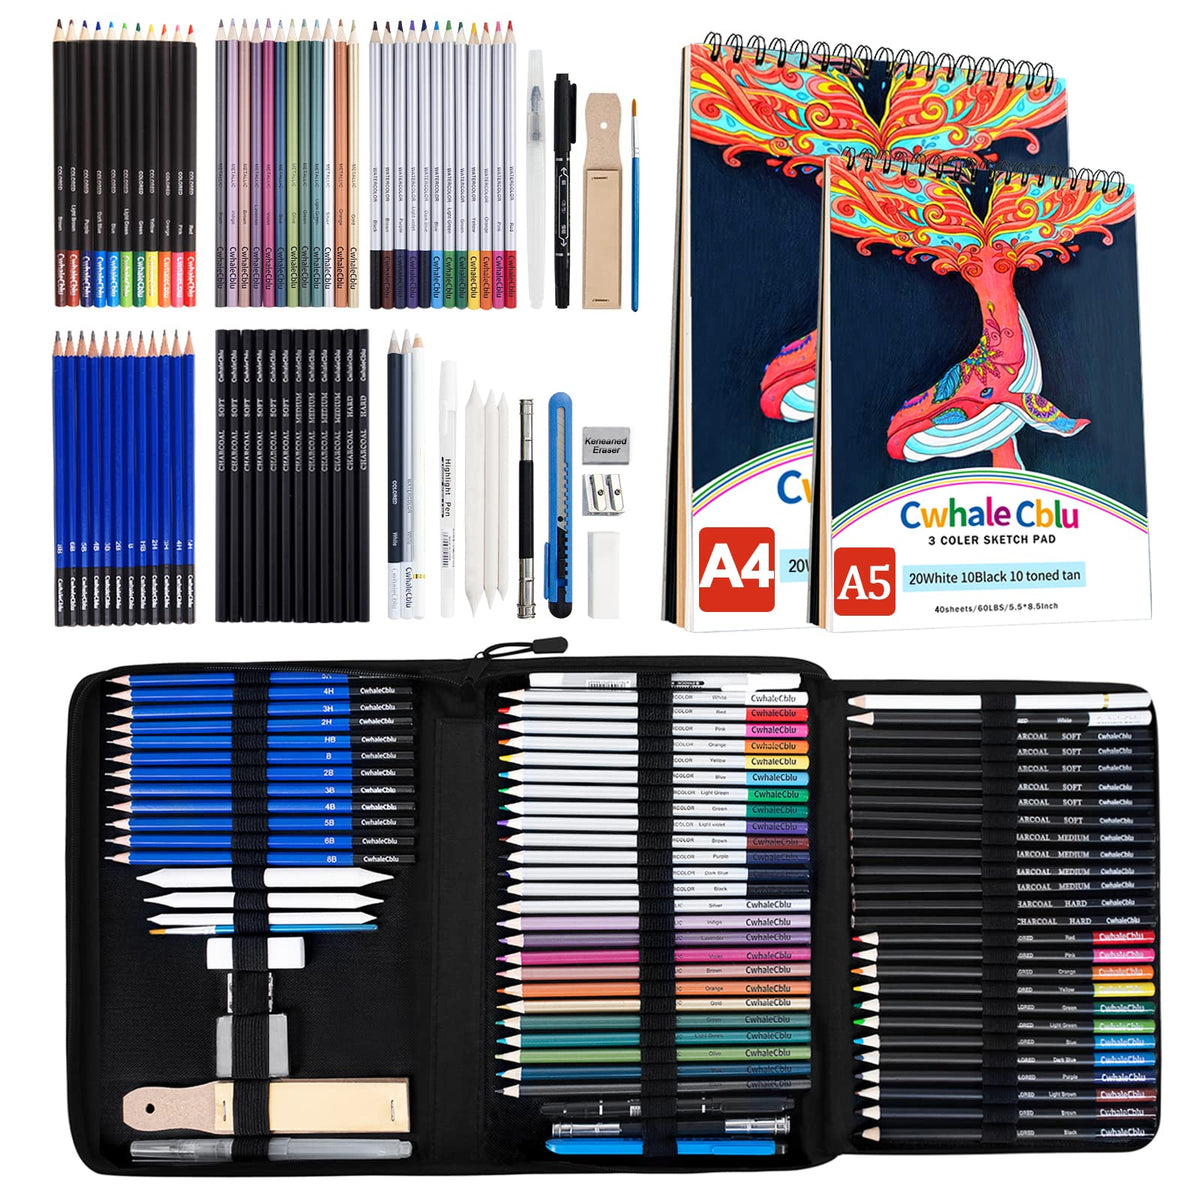 JOY SPOT! 76 Pack Drawing Set, Pro Art Sketching Kit with 3-Color